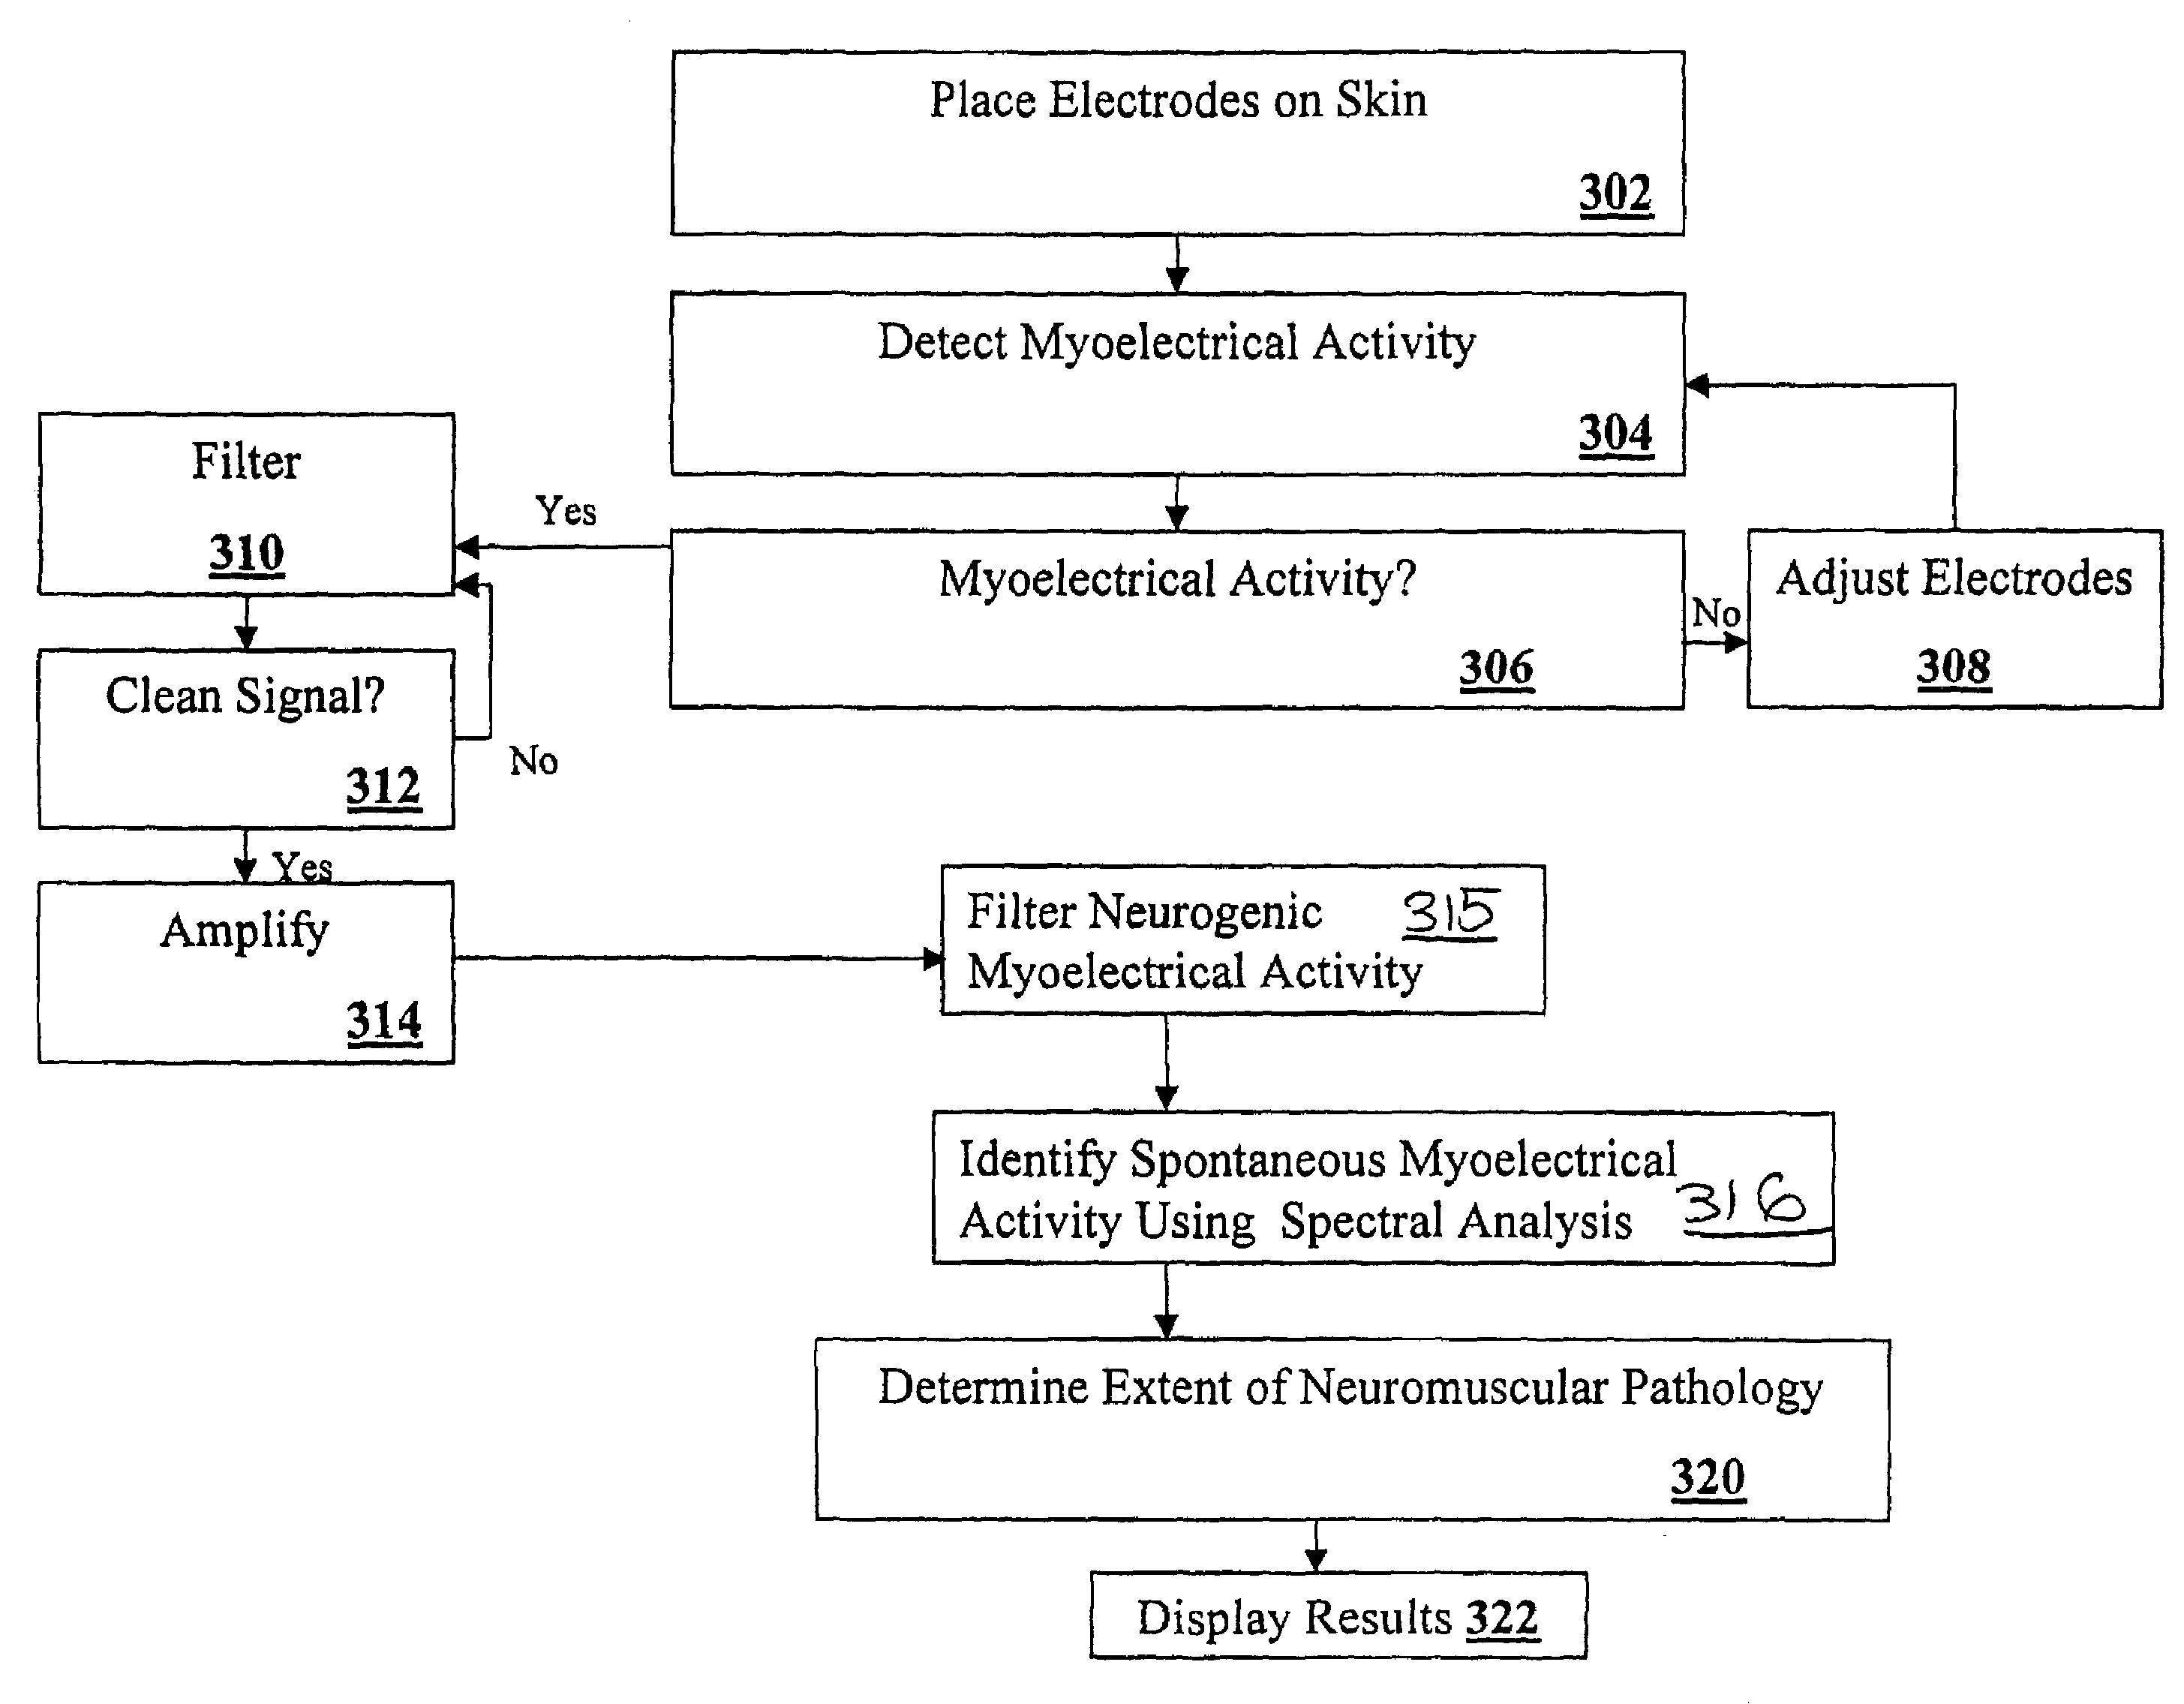 Devices and methods for the non-invasive detection of spontaneous myoelectrical activity